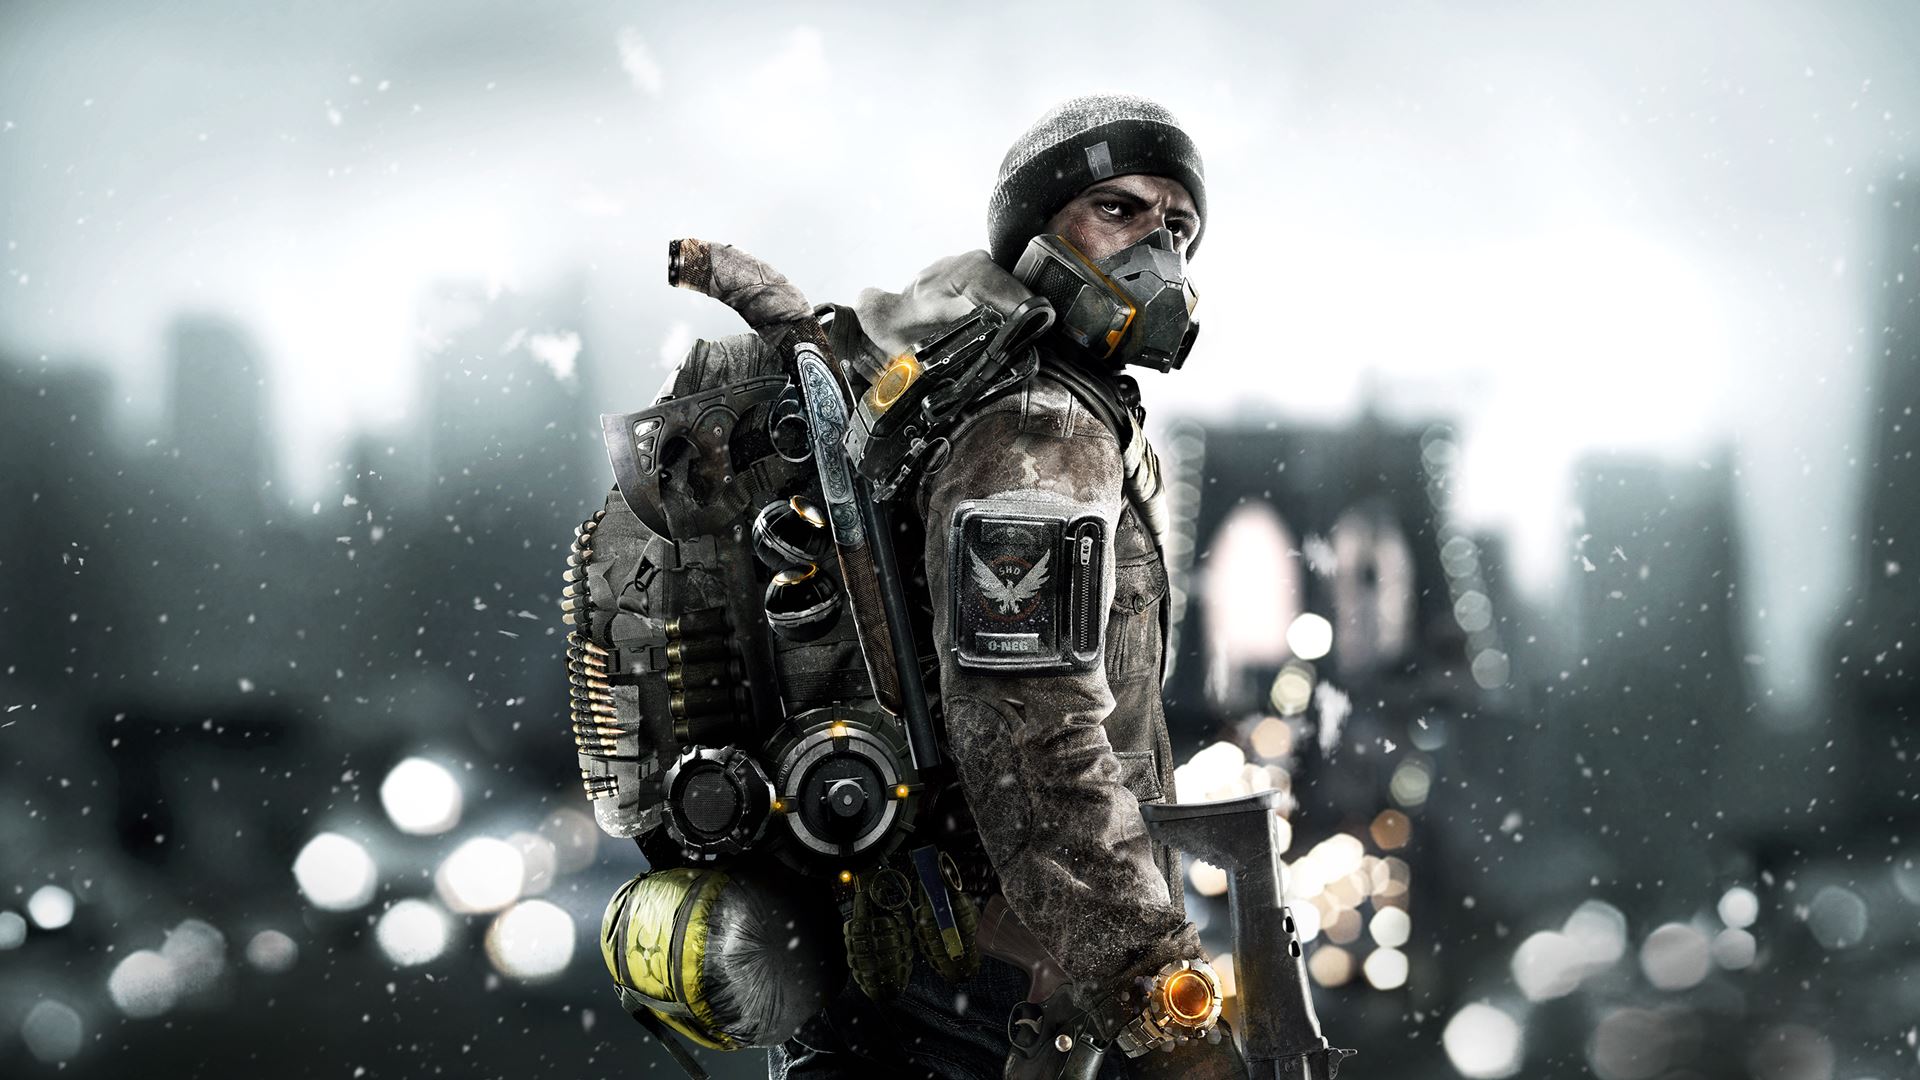 “The Division” Director Leaves Ubisoft for Square Enix - Joining IO Interactive